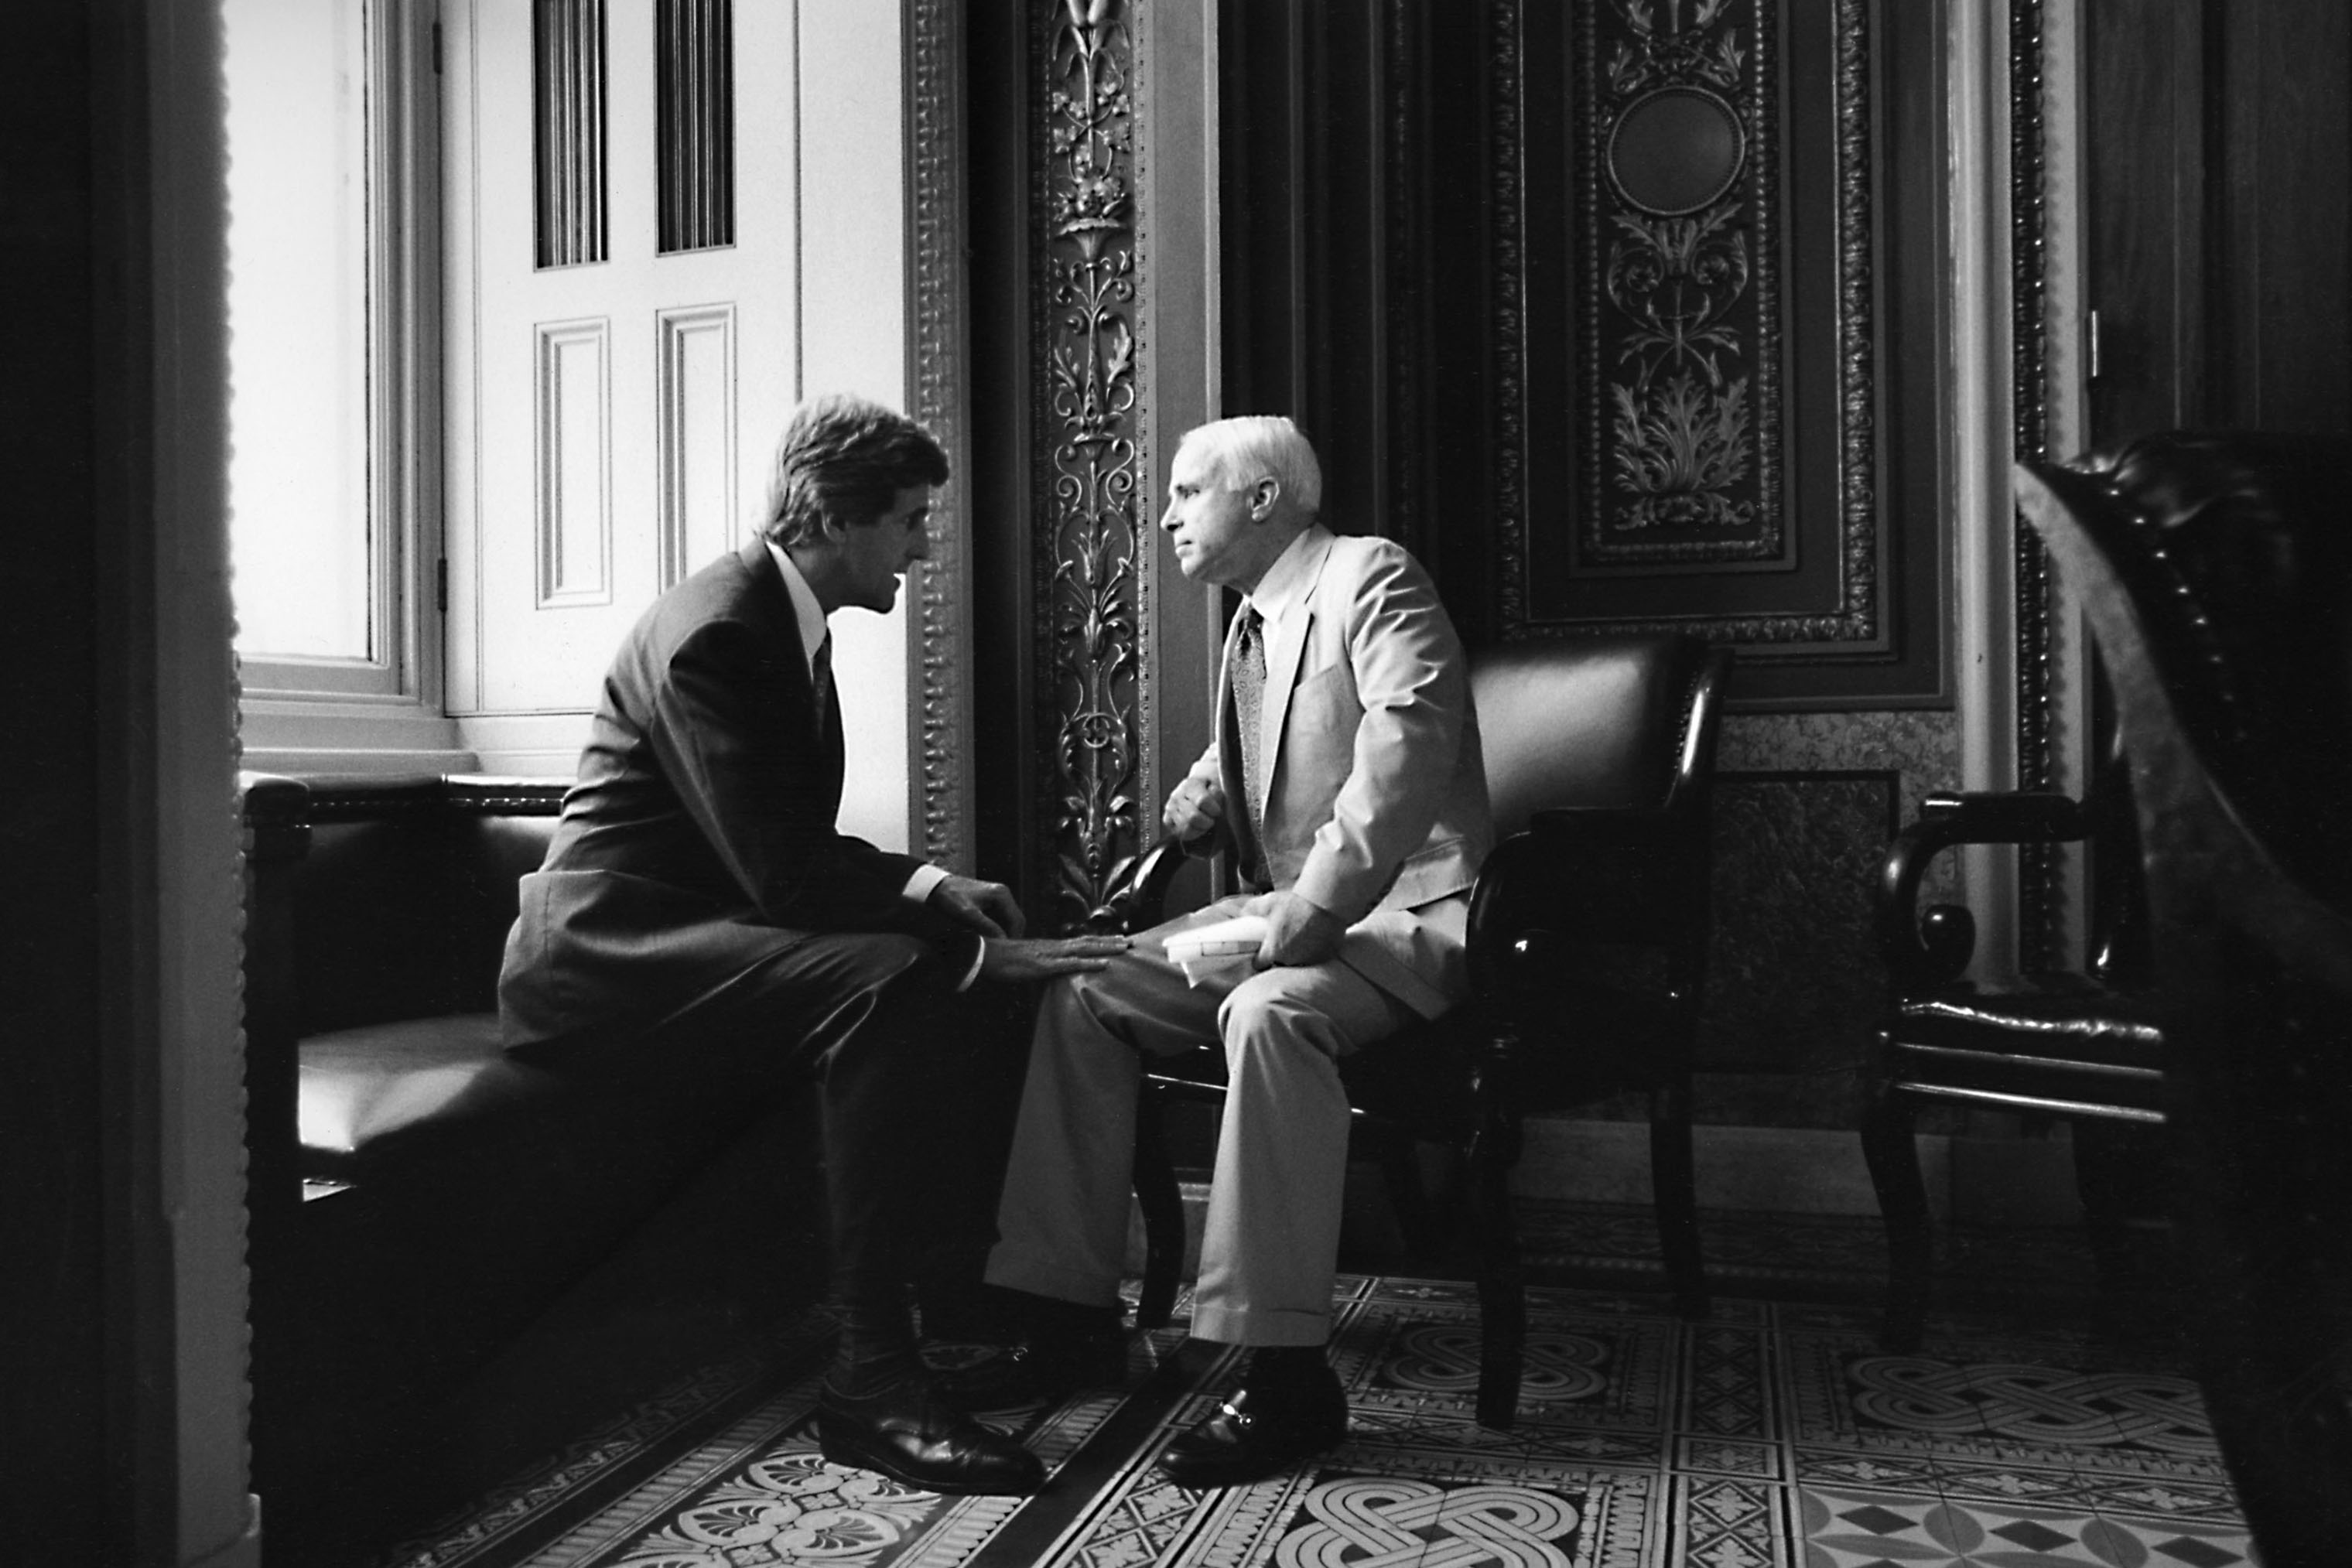 Sen. John Kerry chats with Sen. John McCain in Washington in 1997. (David Hume Kennerly—Getty Images)